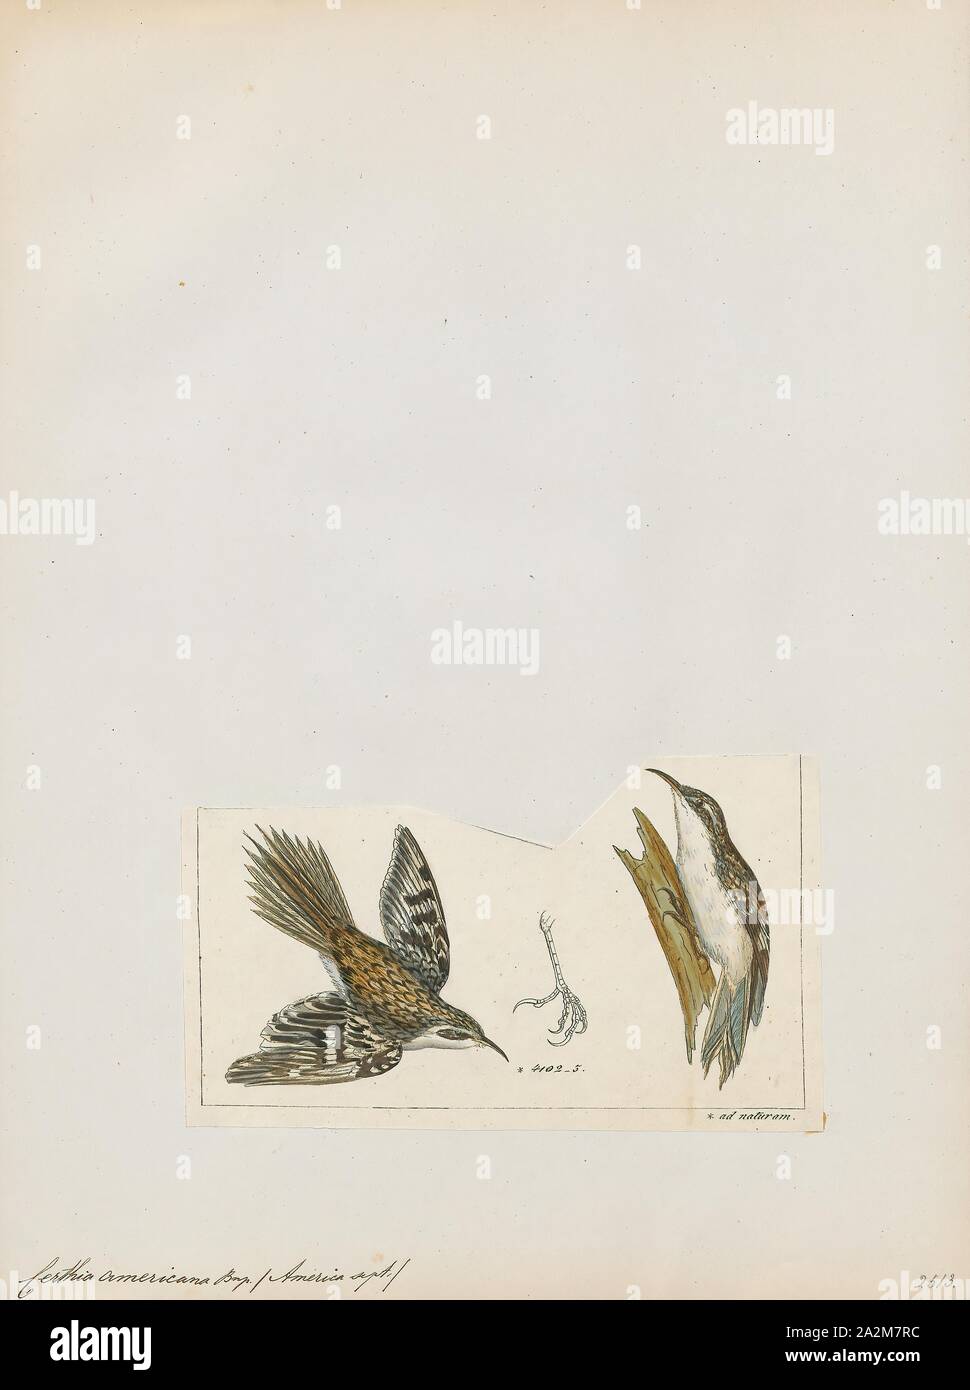 Certhia americana, Print, The brown creeper (Certhia americana), also known as the American treecreeper, is a small songbird, the only North American member of the treecreeper family Certhiidae., 1820-1860 Stock Photo